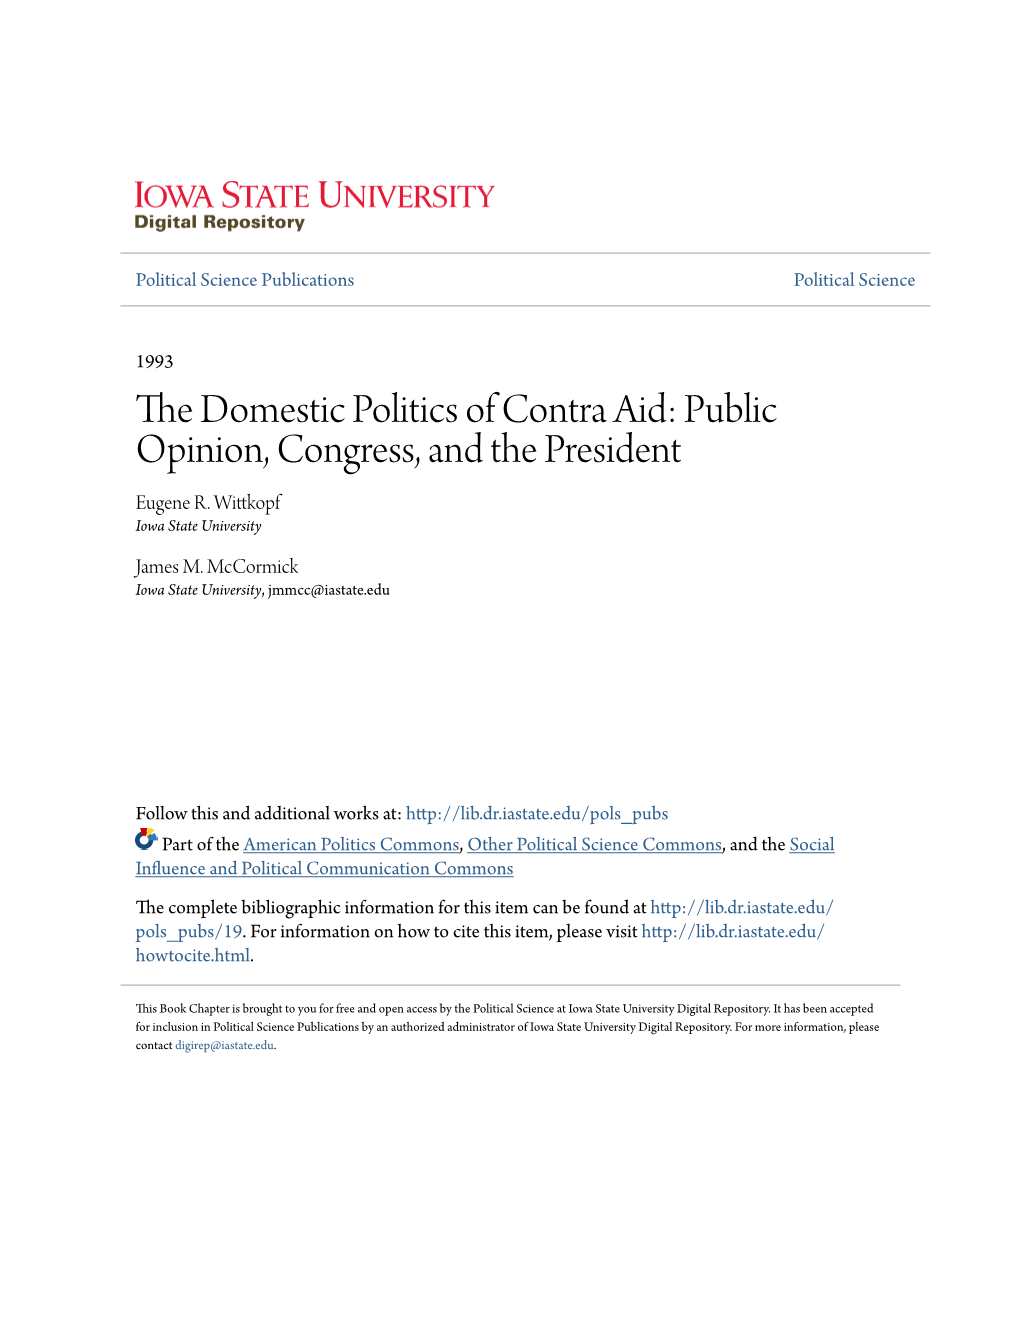 The Domestic Politics of Contra Aid: Public Opinion, Congress, and the President